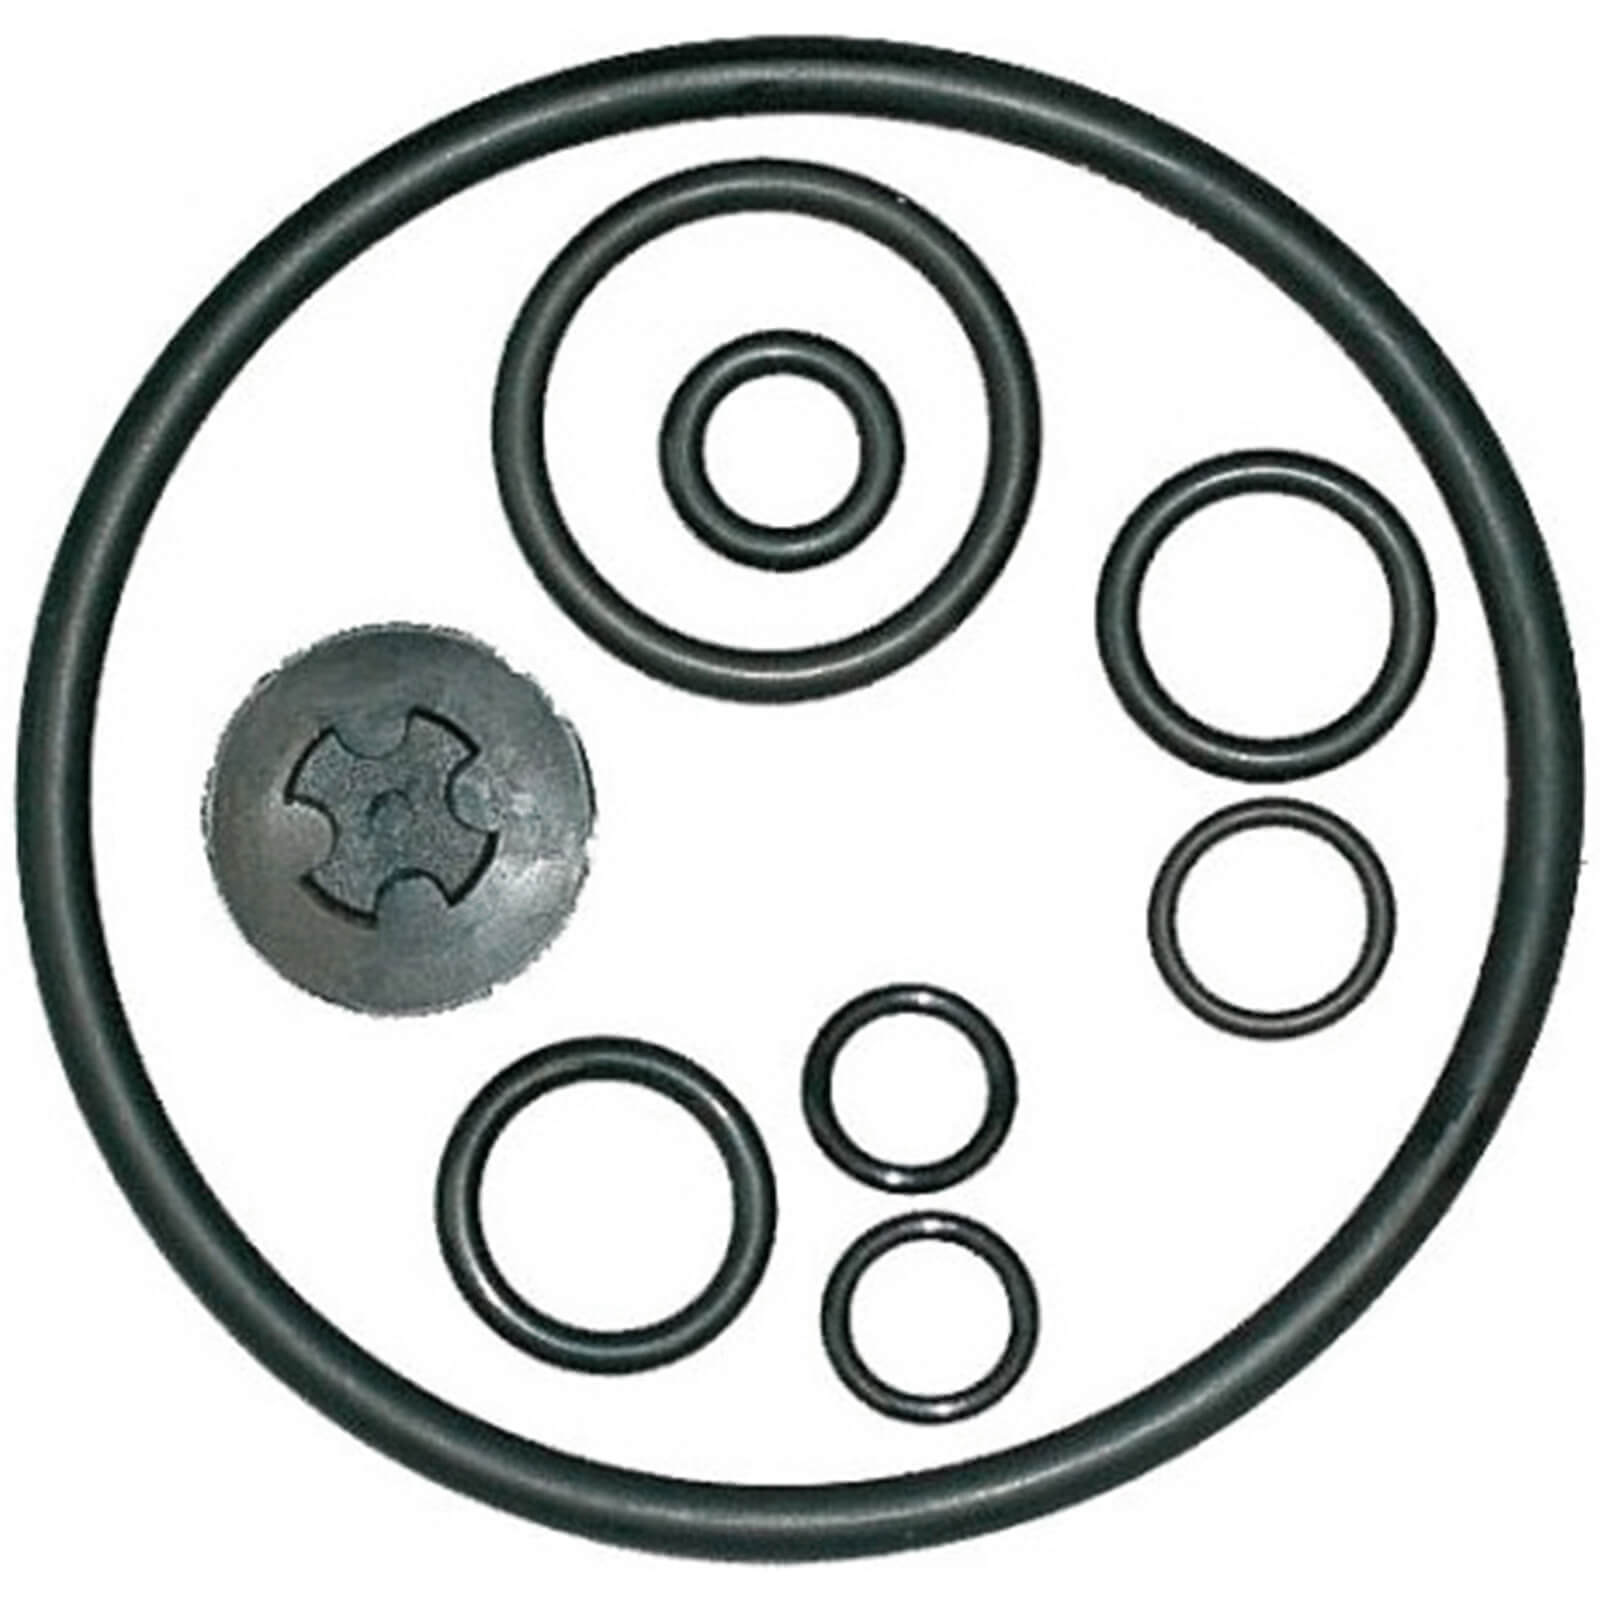 Photo of Solo Fkm Gasket Kit For 456-457 And 456pro Pressure Sprayers